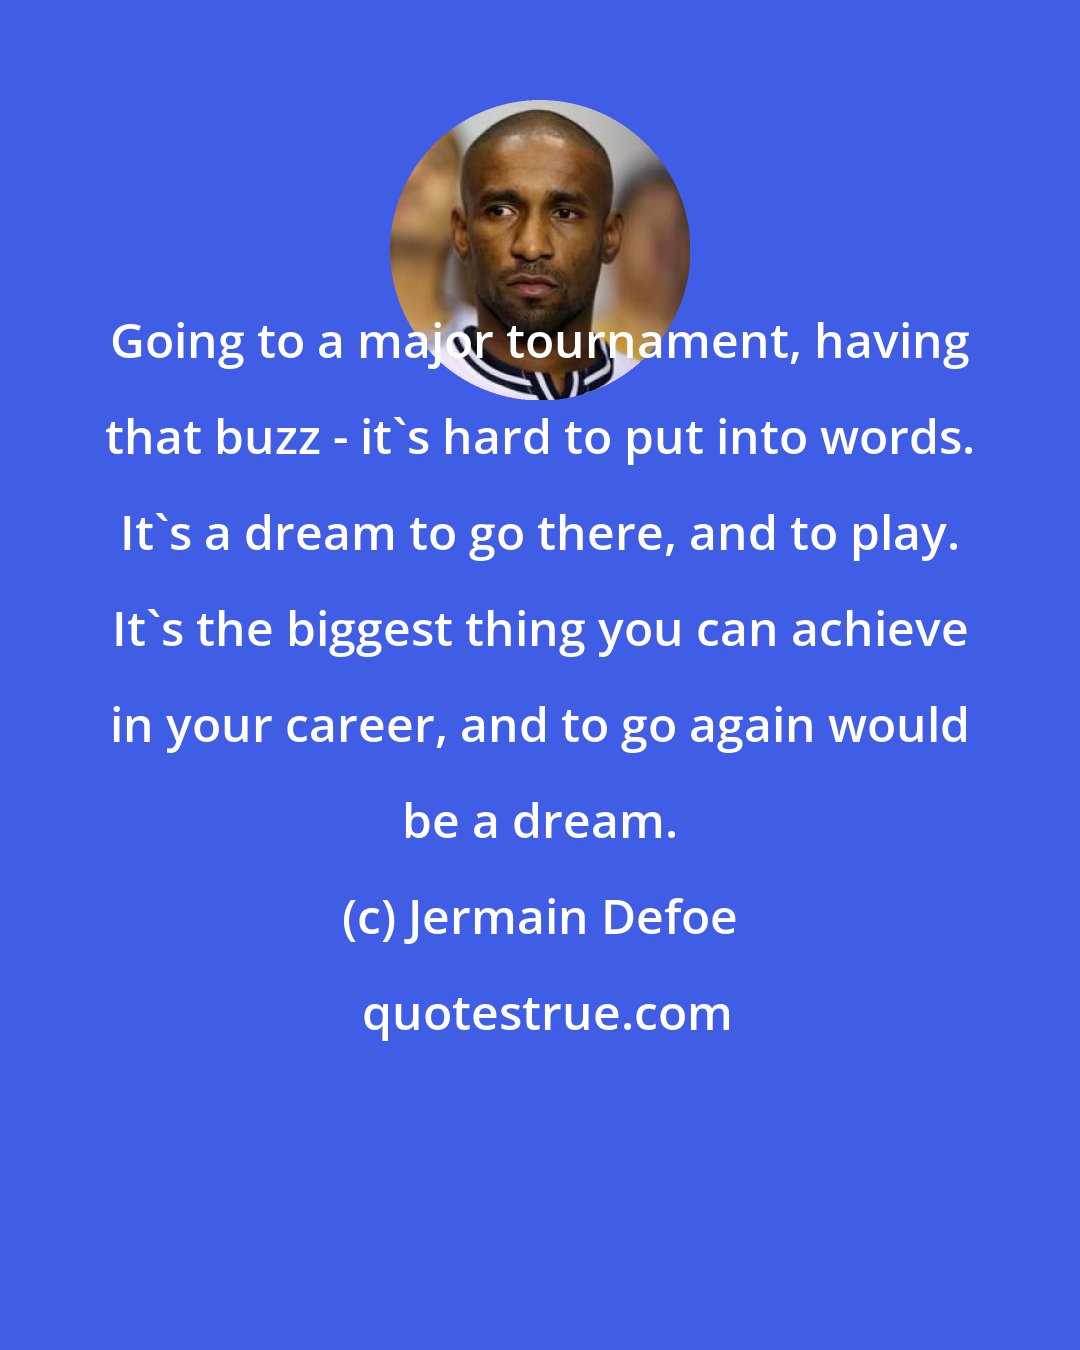 Jermain Defoe: Going to a major tournament, having that buzz - it's hard to put into words. It's a dream to go there, and to play. It's the biggest thing you can achieve in your career, and to go again would be a dream.